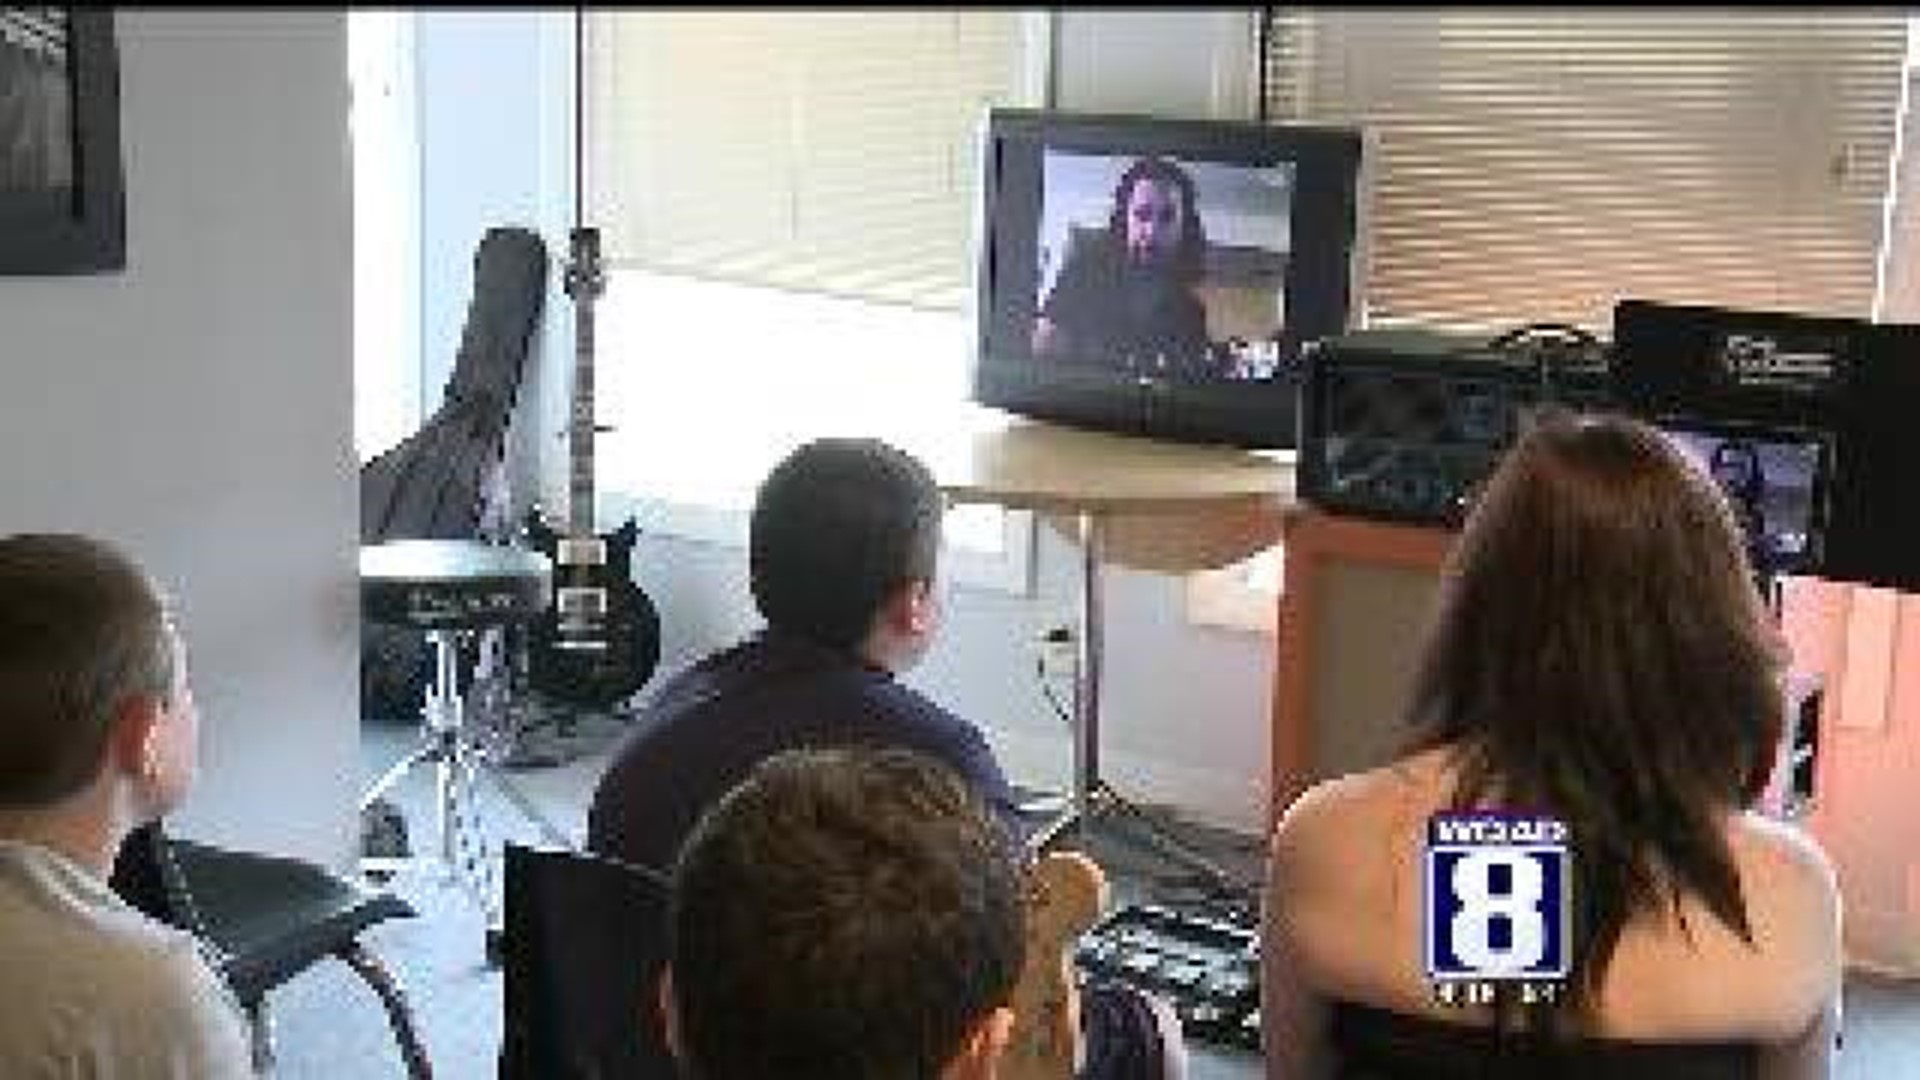 Students at Rock Academy talk to Kiss player